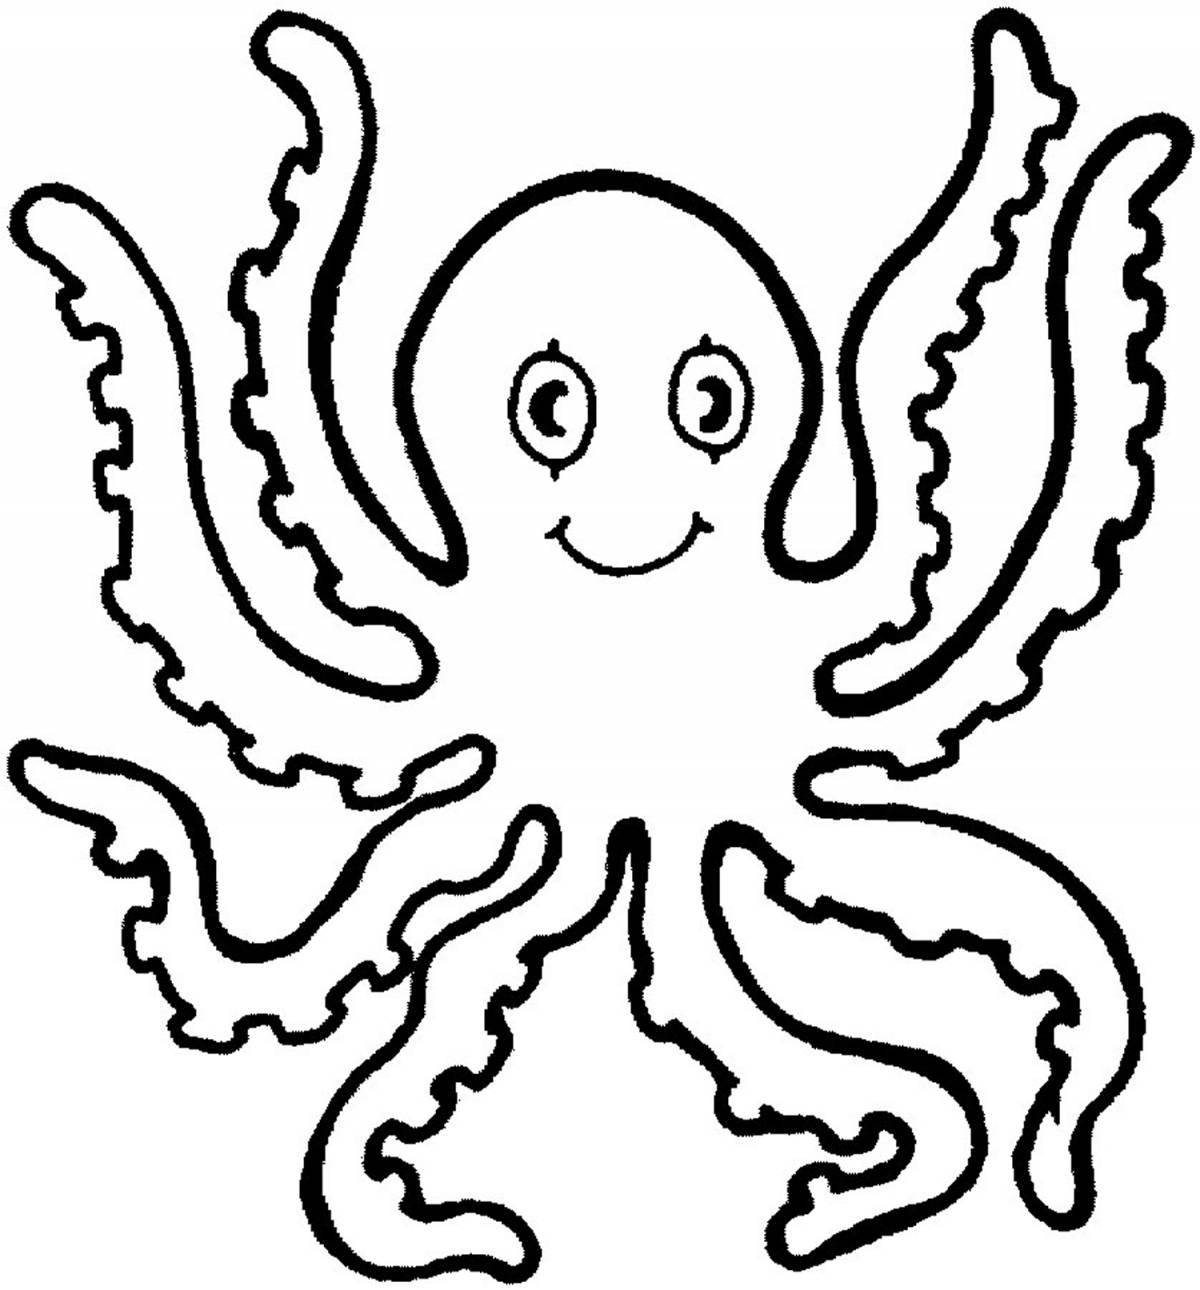 A funny octopus coloring for the little ones